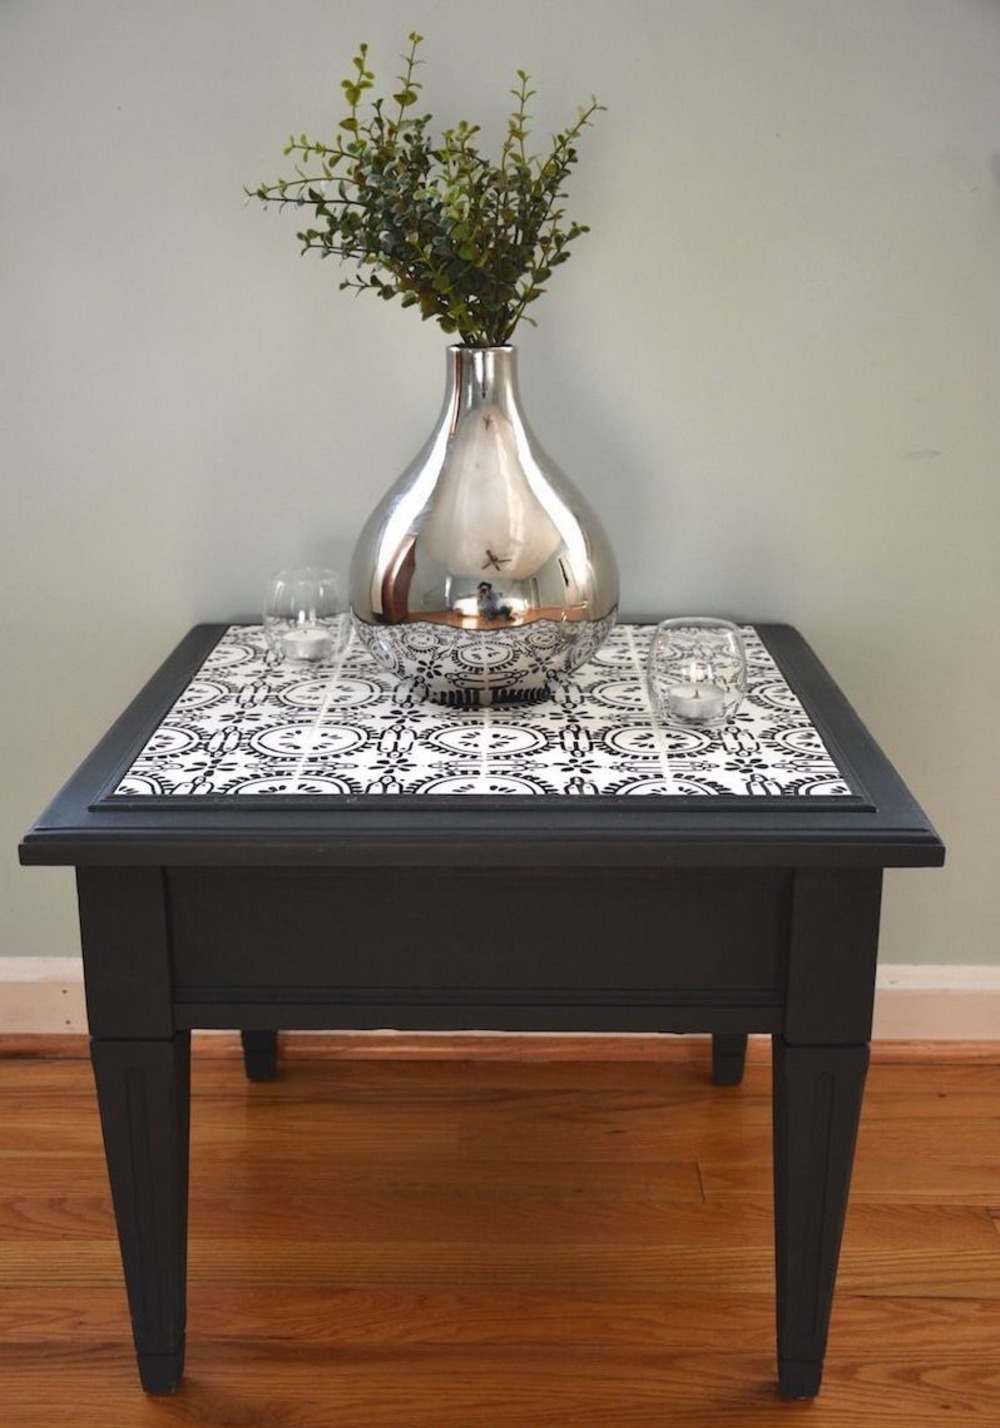 use black wood with painted white tiles as tiled or stained